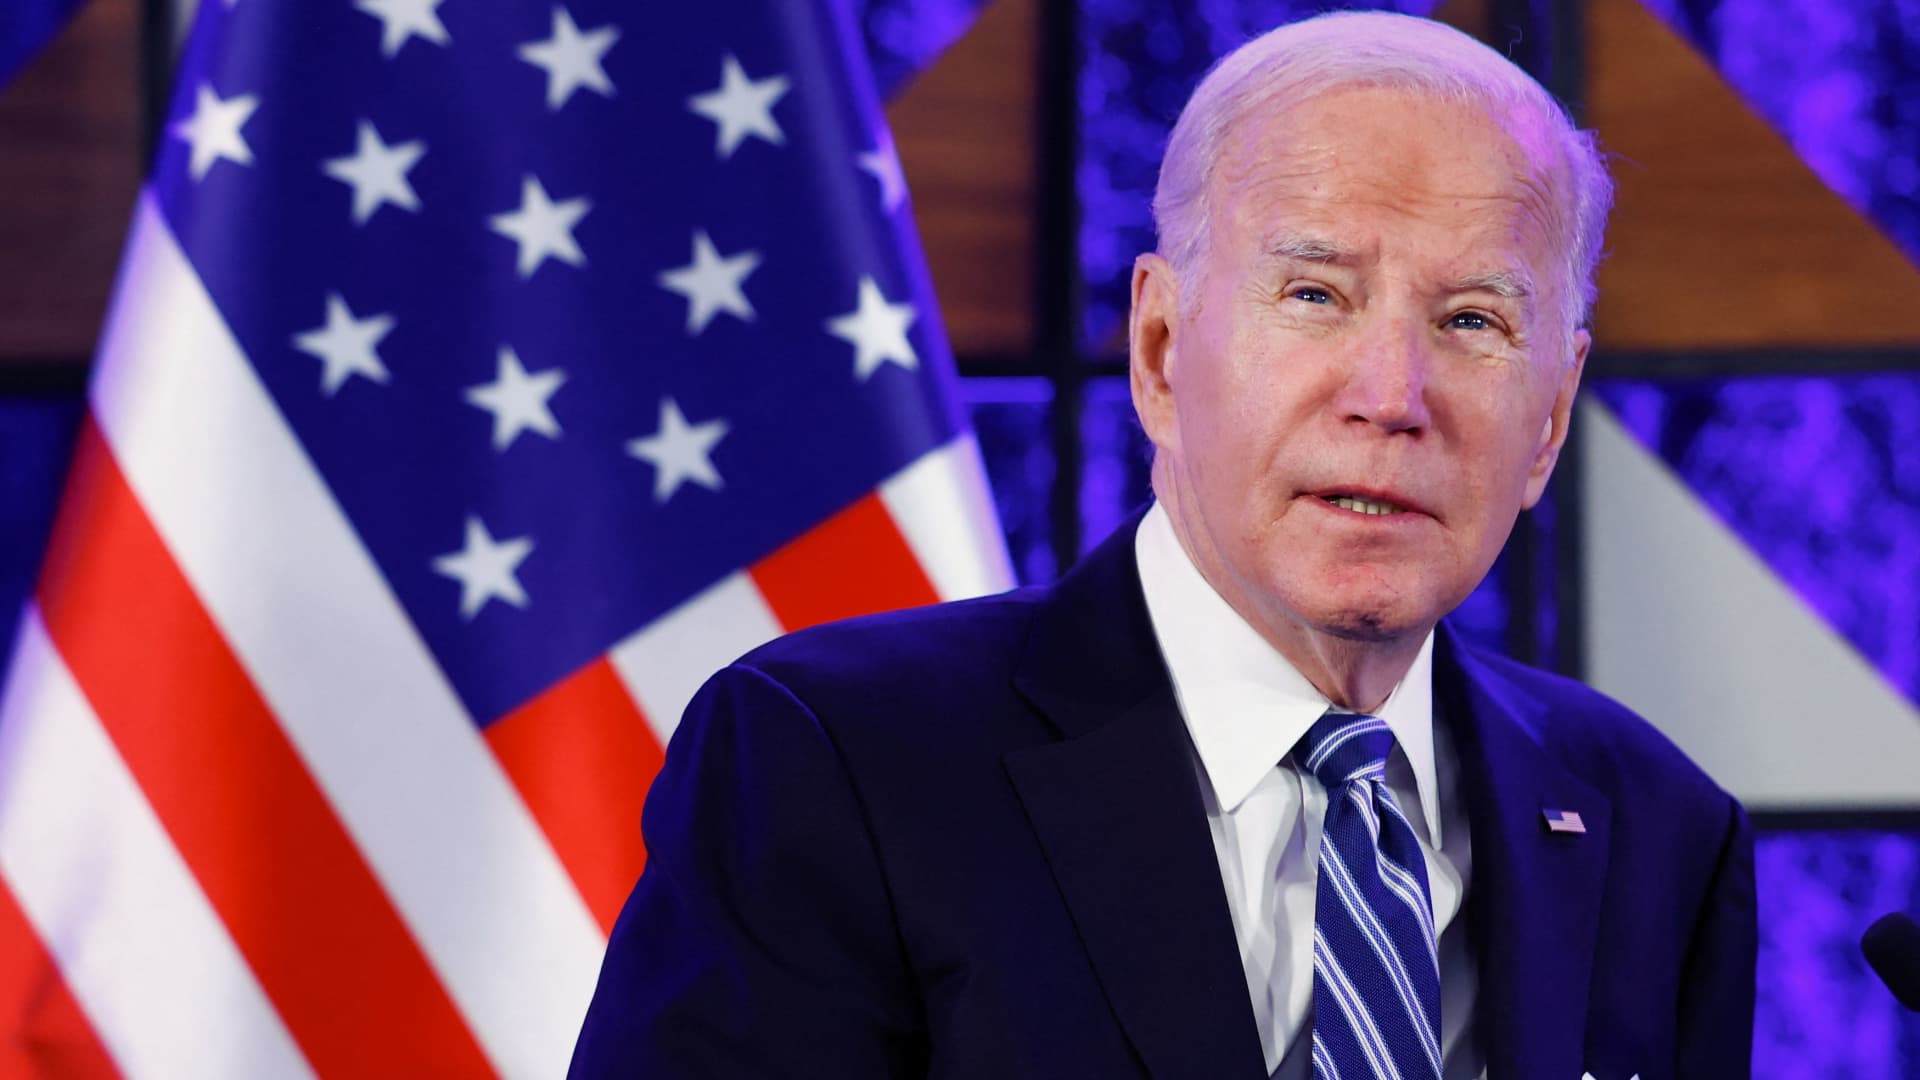 Biden Woos Israel Amid Conflicts and Shrinking U.S. Approval